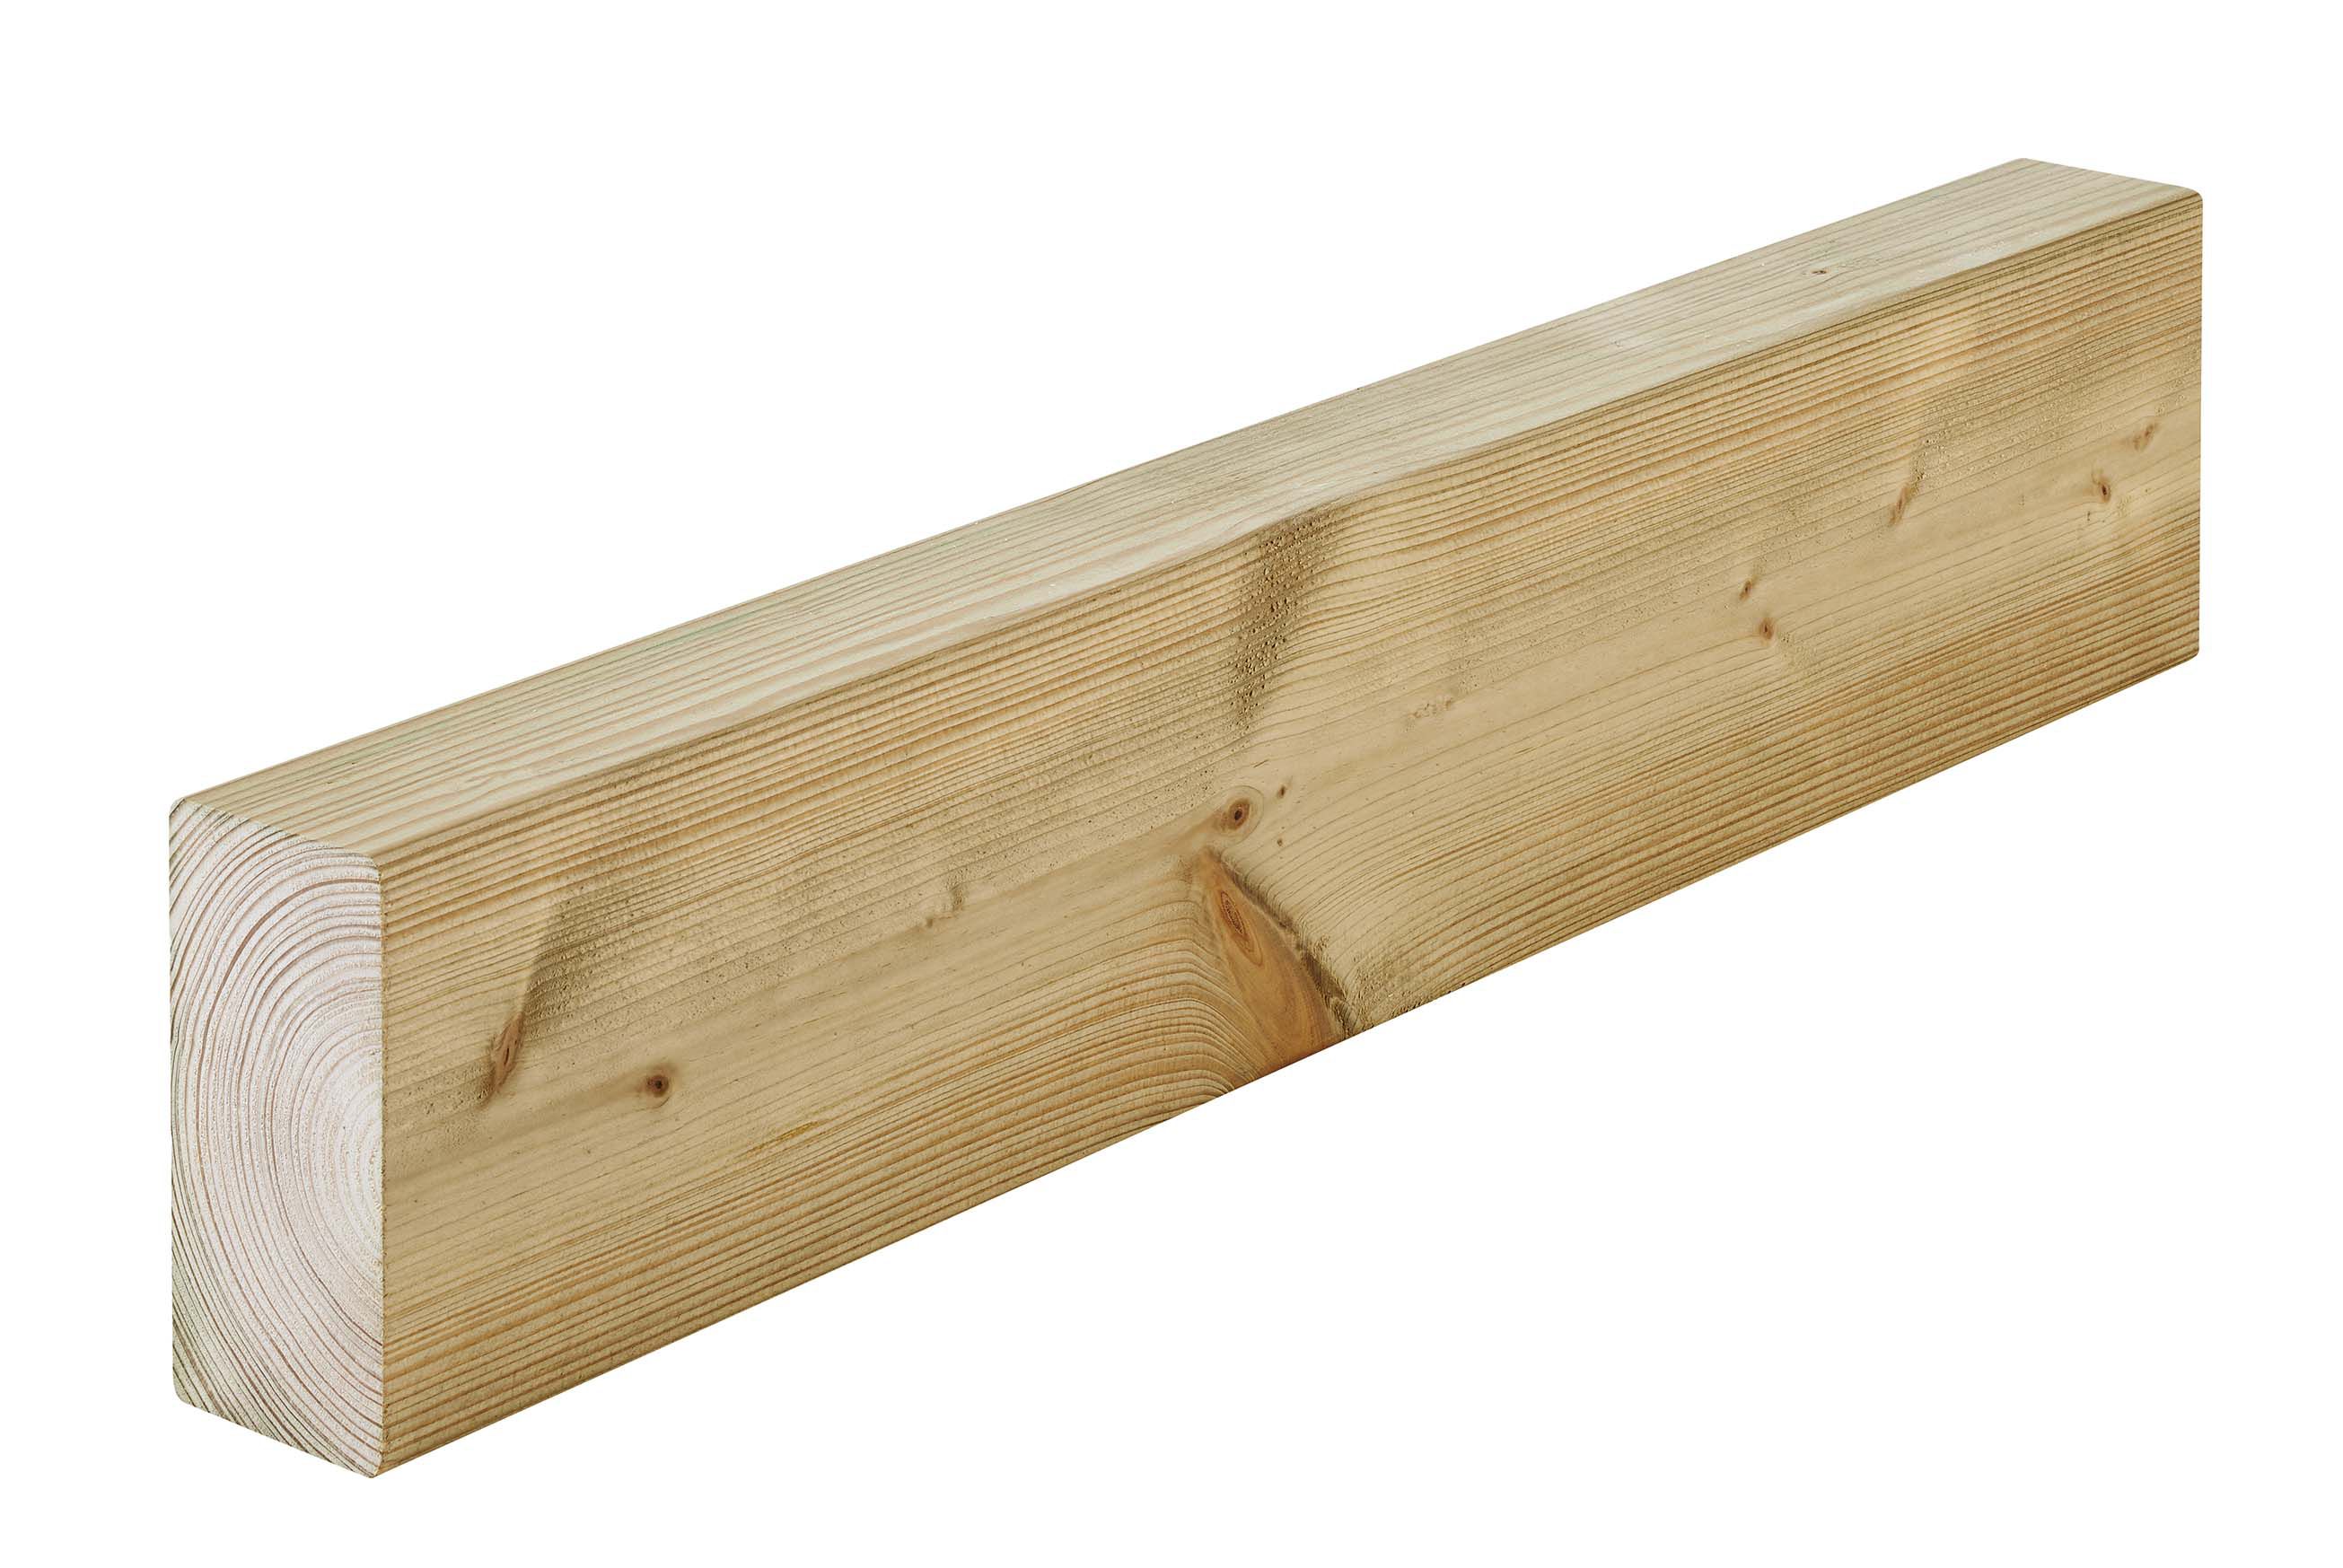 Treated Smooth Planed Round edge Treated Redwood pine Carcassing timber (L)2.4m (W)95mm (T)45mm, Pack of 4